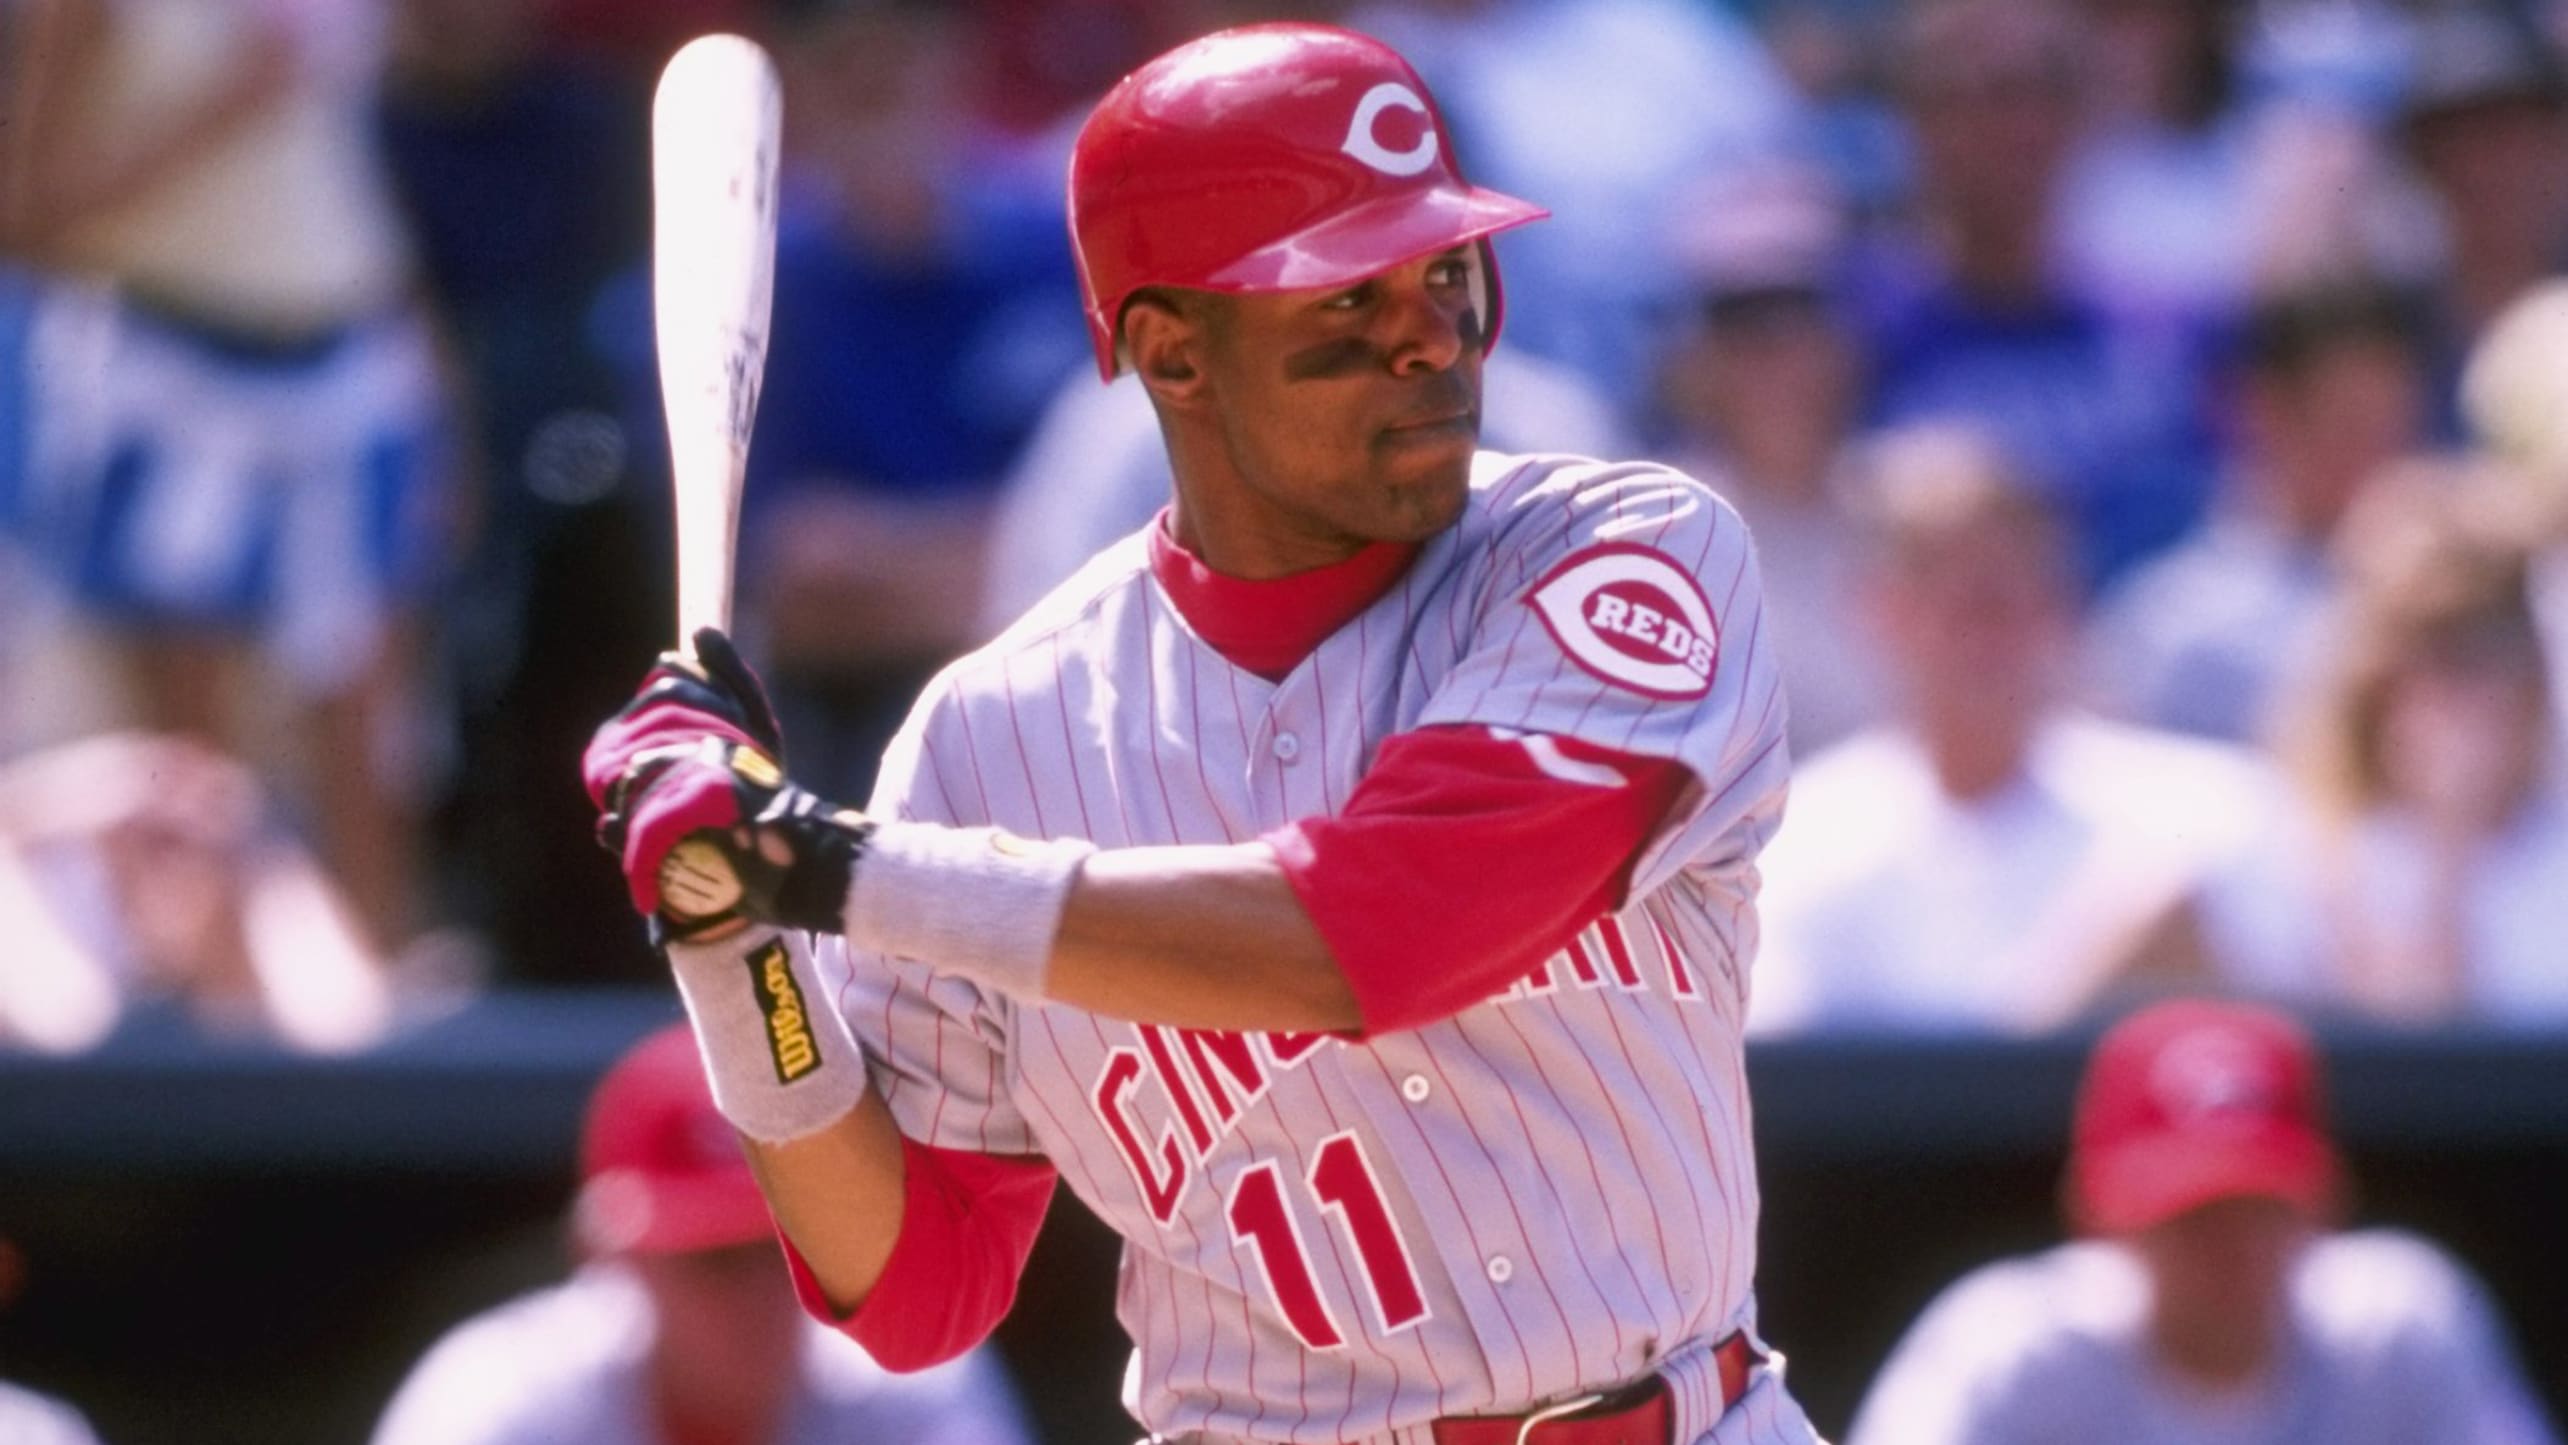 Barry Larkin at the plate